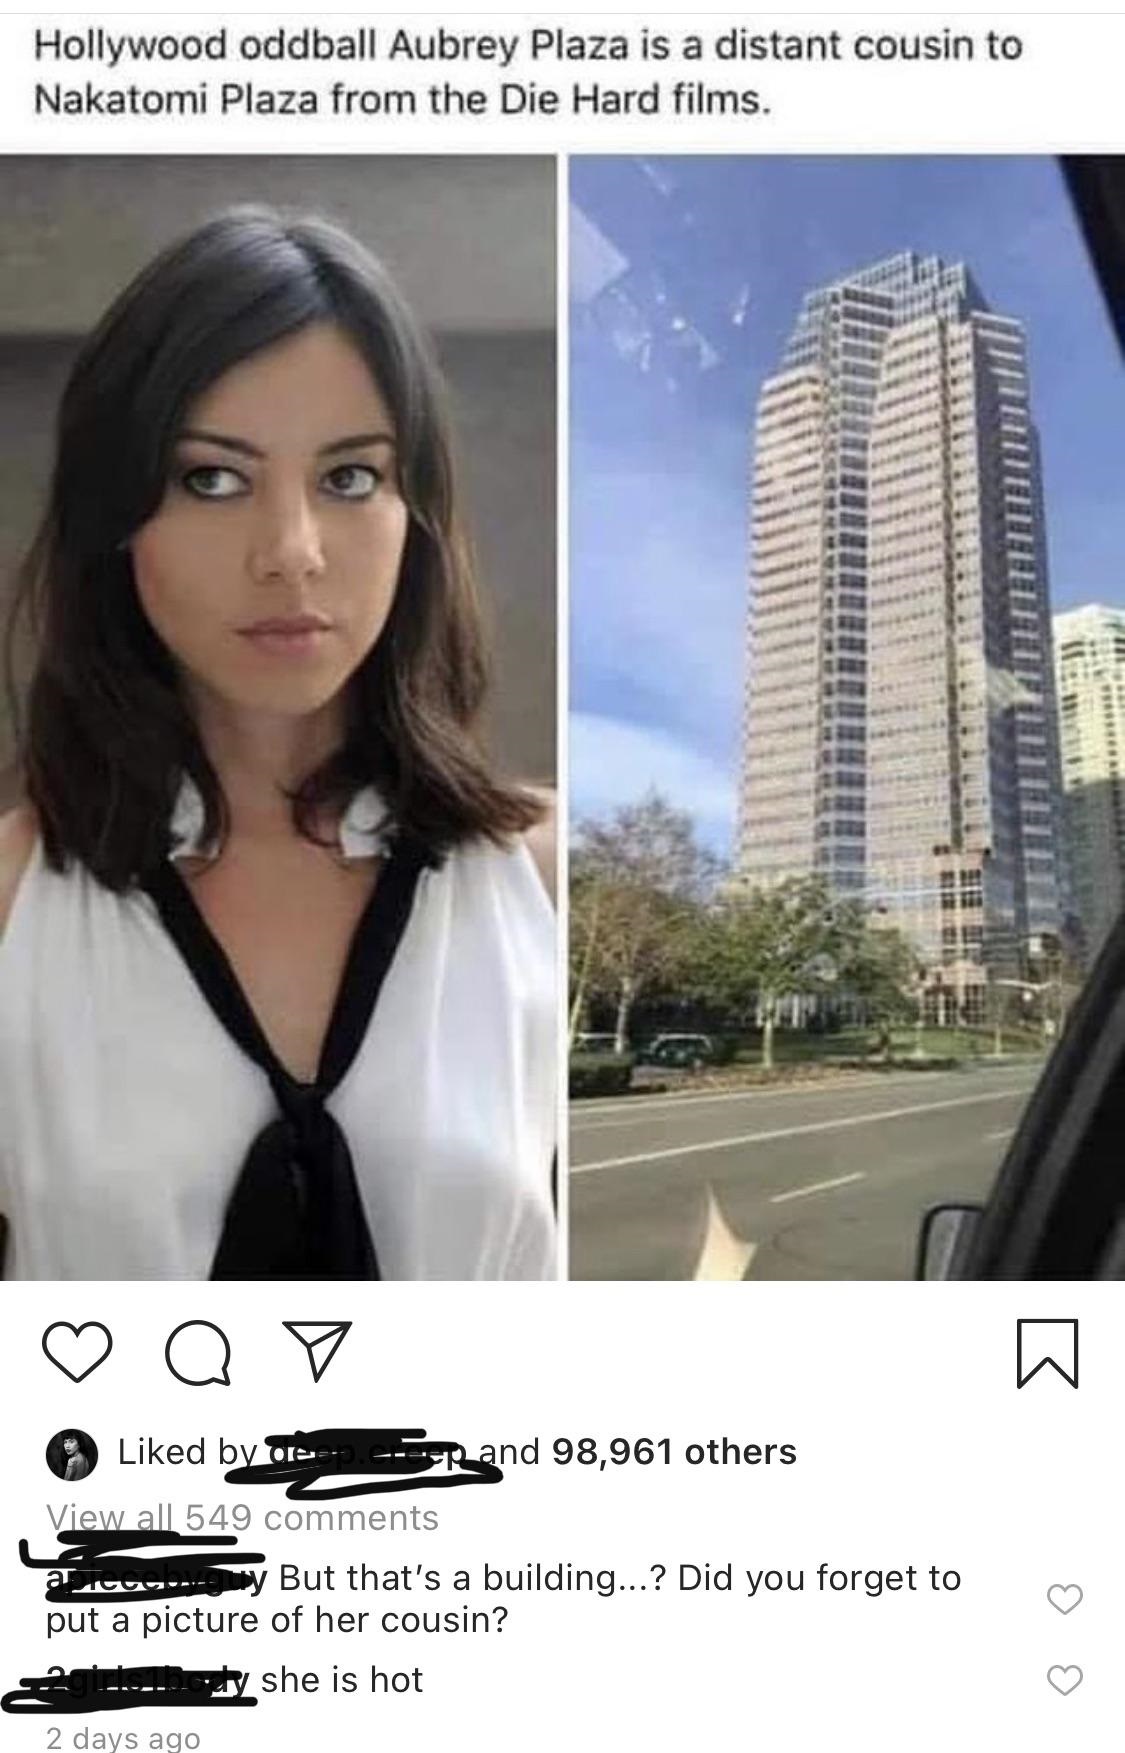 clever jokes - black hair - Hollywood oddball Aubrey Plaza is a distant cousin to Nakatomi Plaza from the Die Hard films. O B d by or Rand 98,961 others View all 549 But that's a building...? Did you forget to put a picture of her cousin? she is hot 10U 2